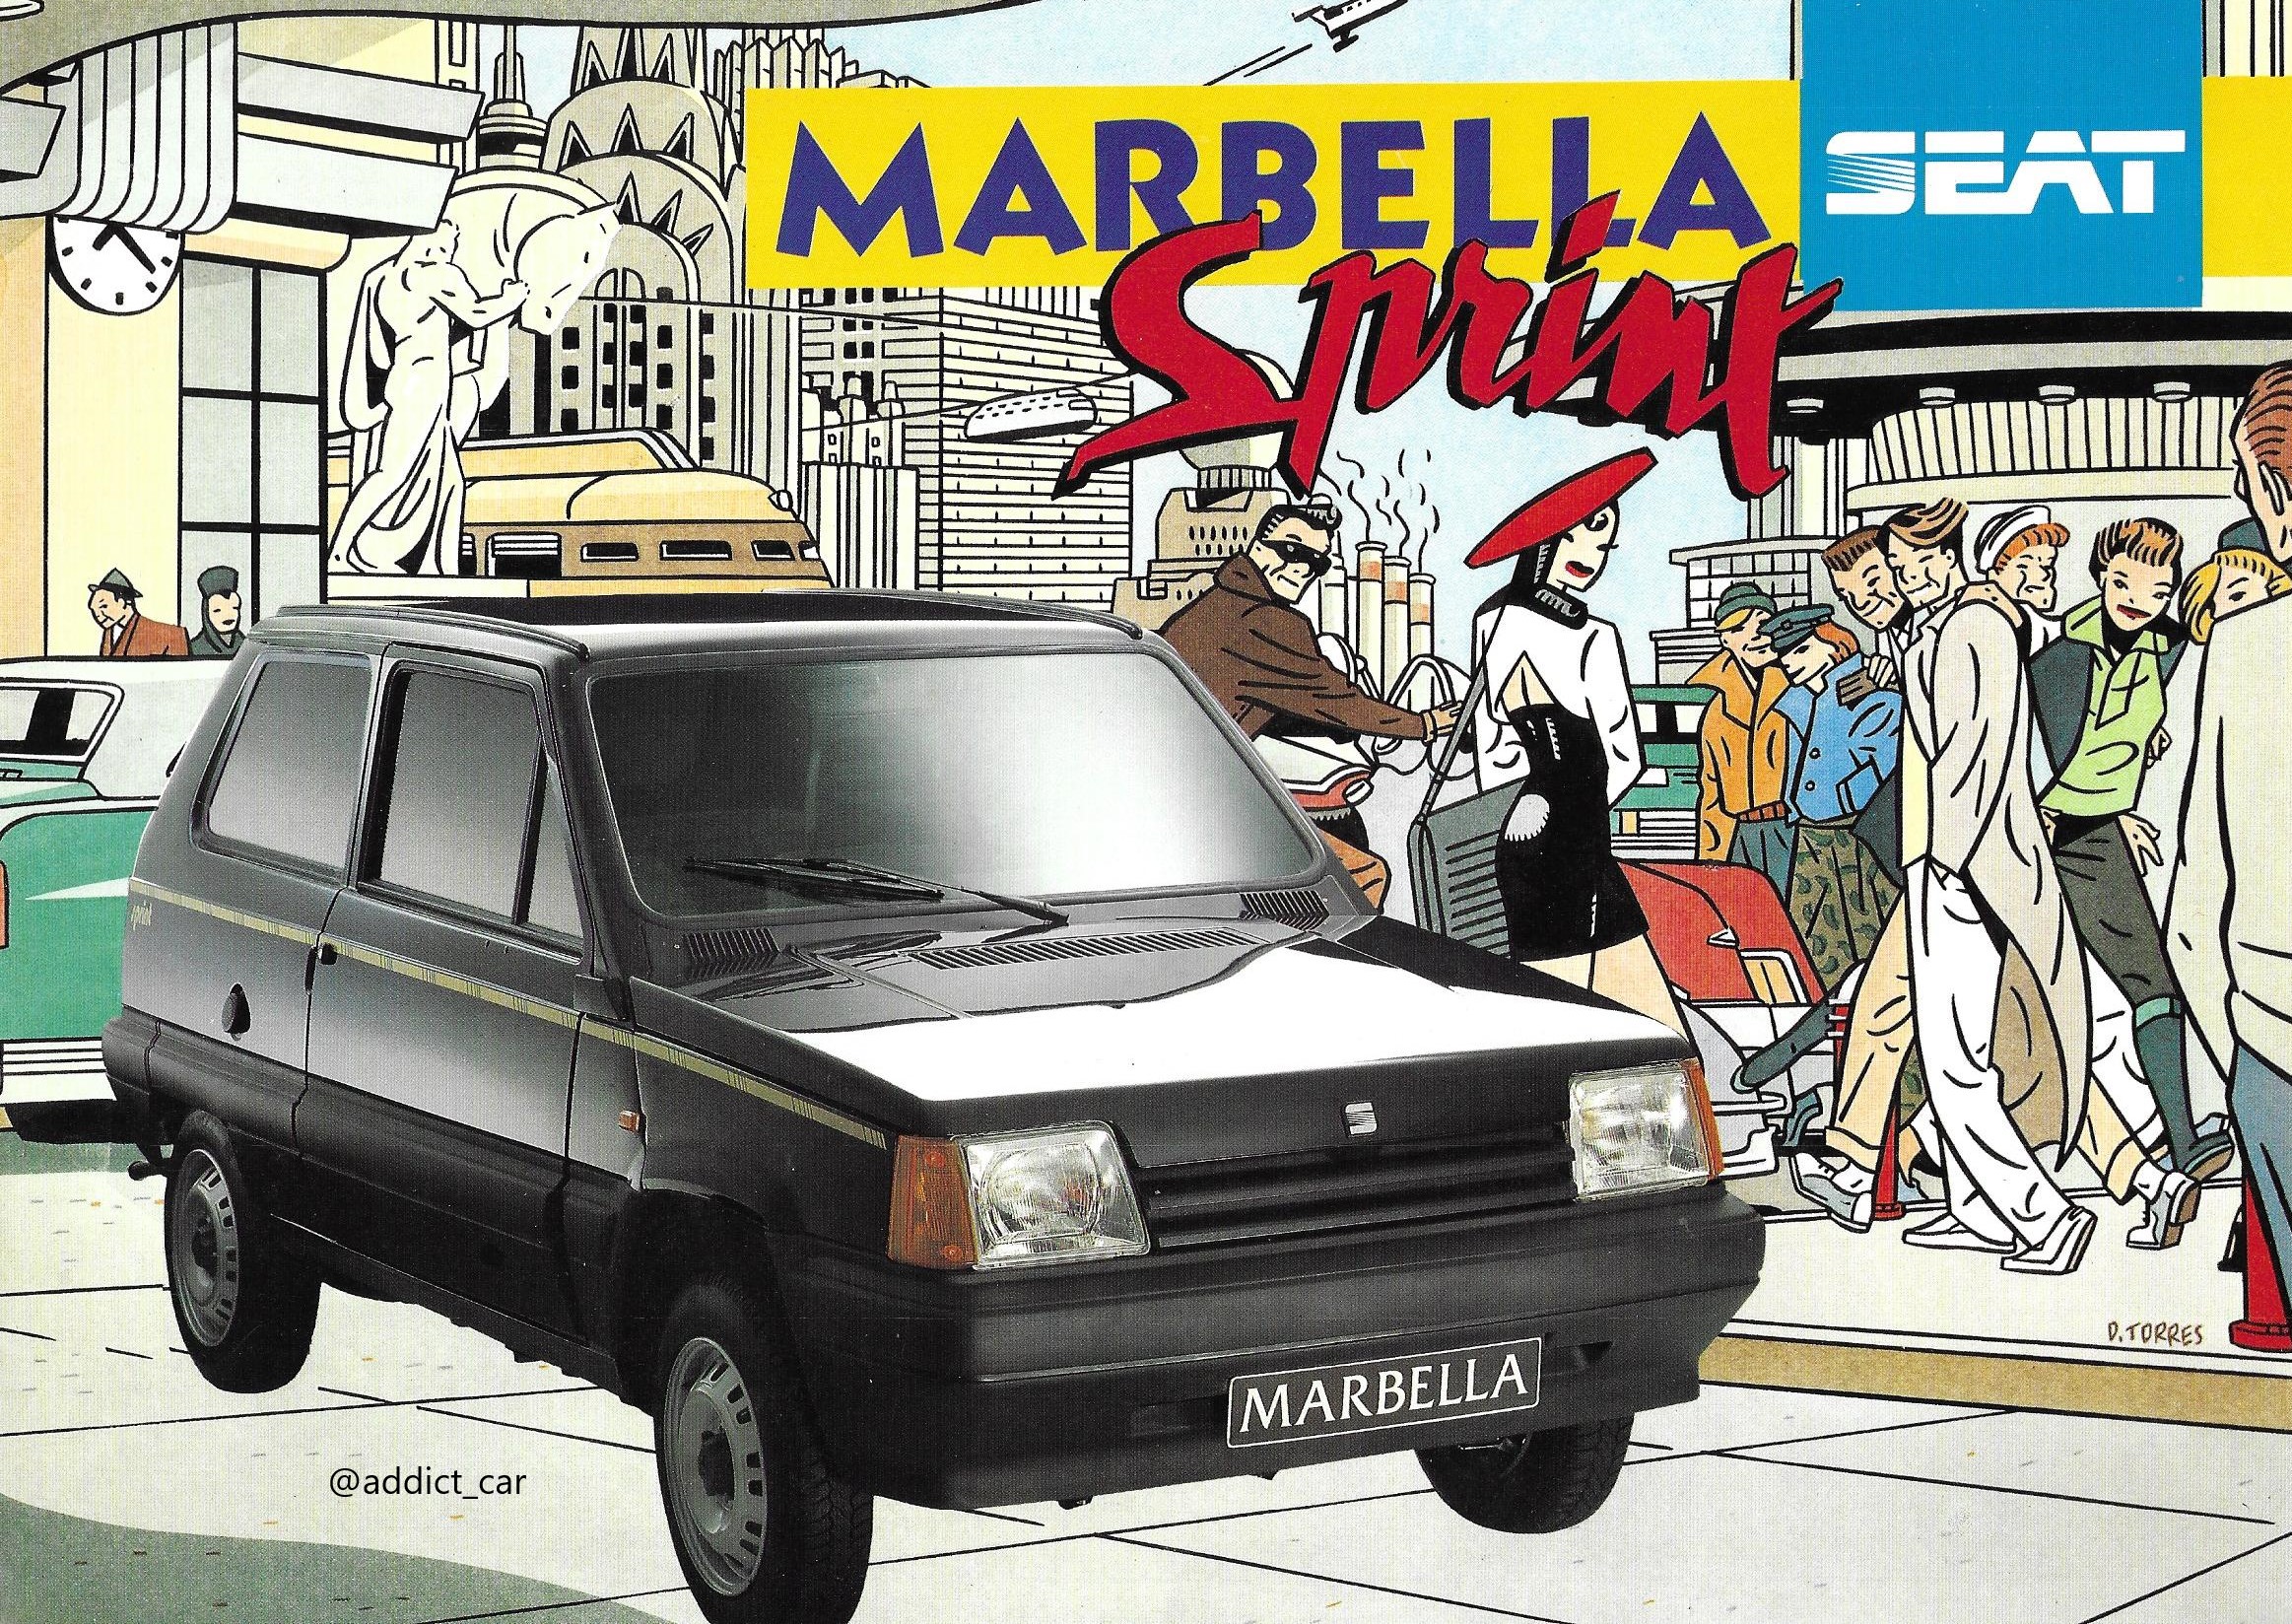 1996 Seat Marbella Fun, After Fiat and Seat broke all tie…